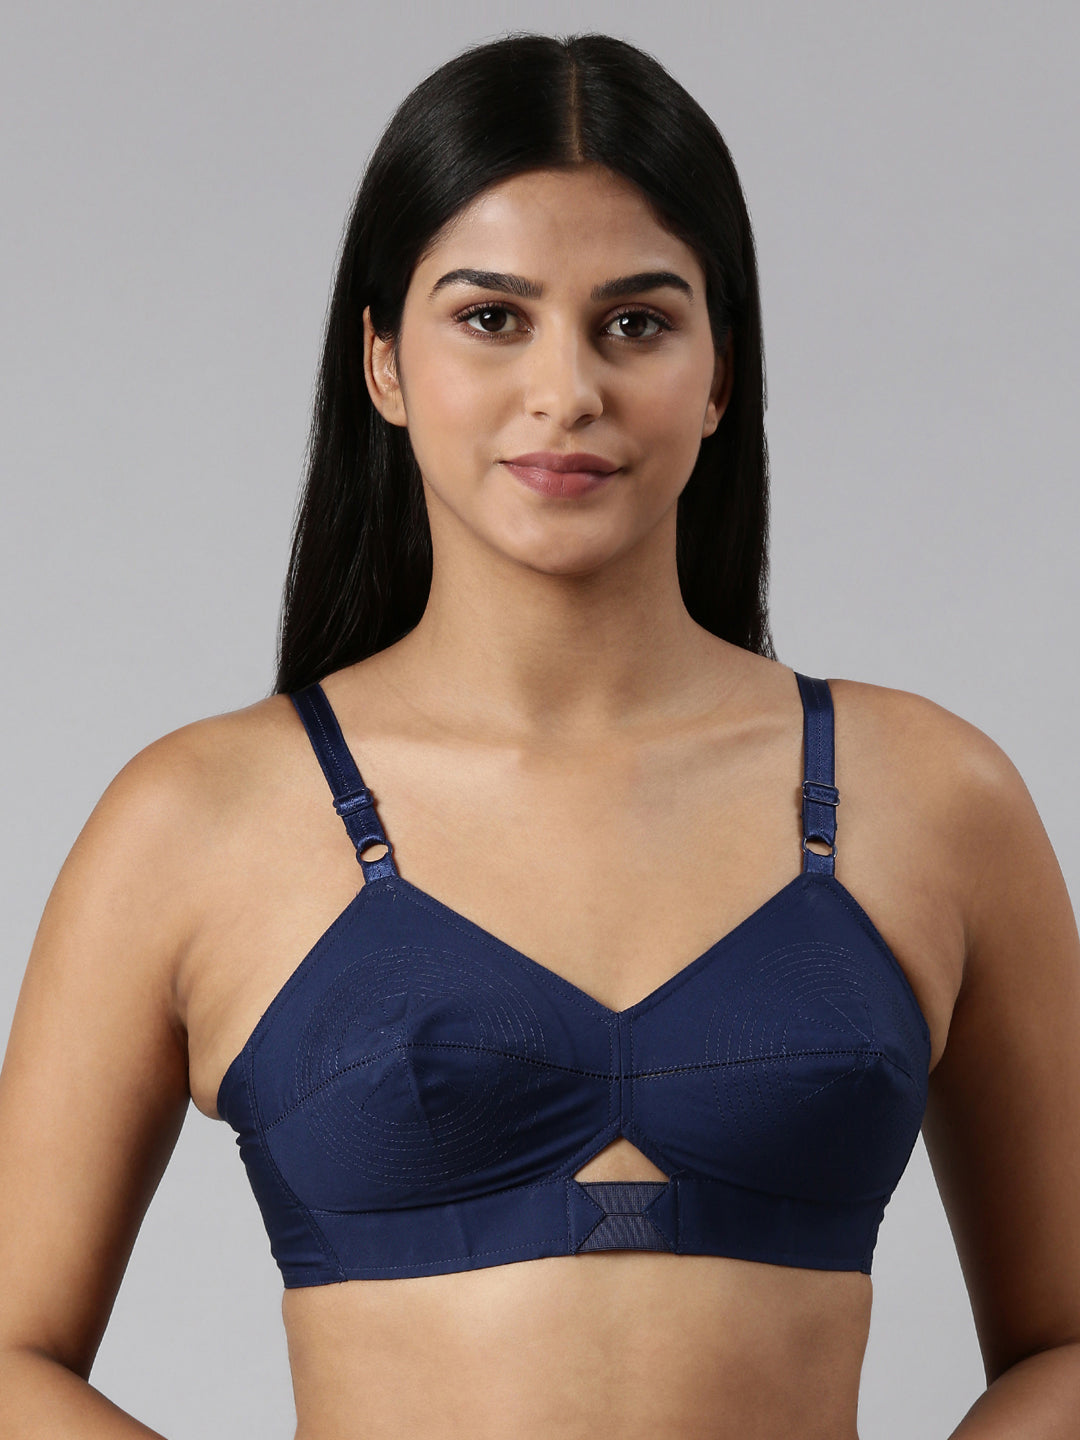 blossom-authentic bra-B Cup-blue1-Woven cotton-everyday bra